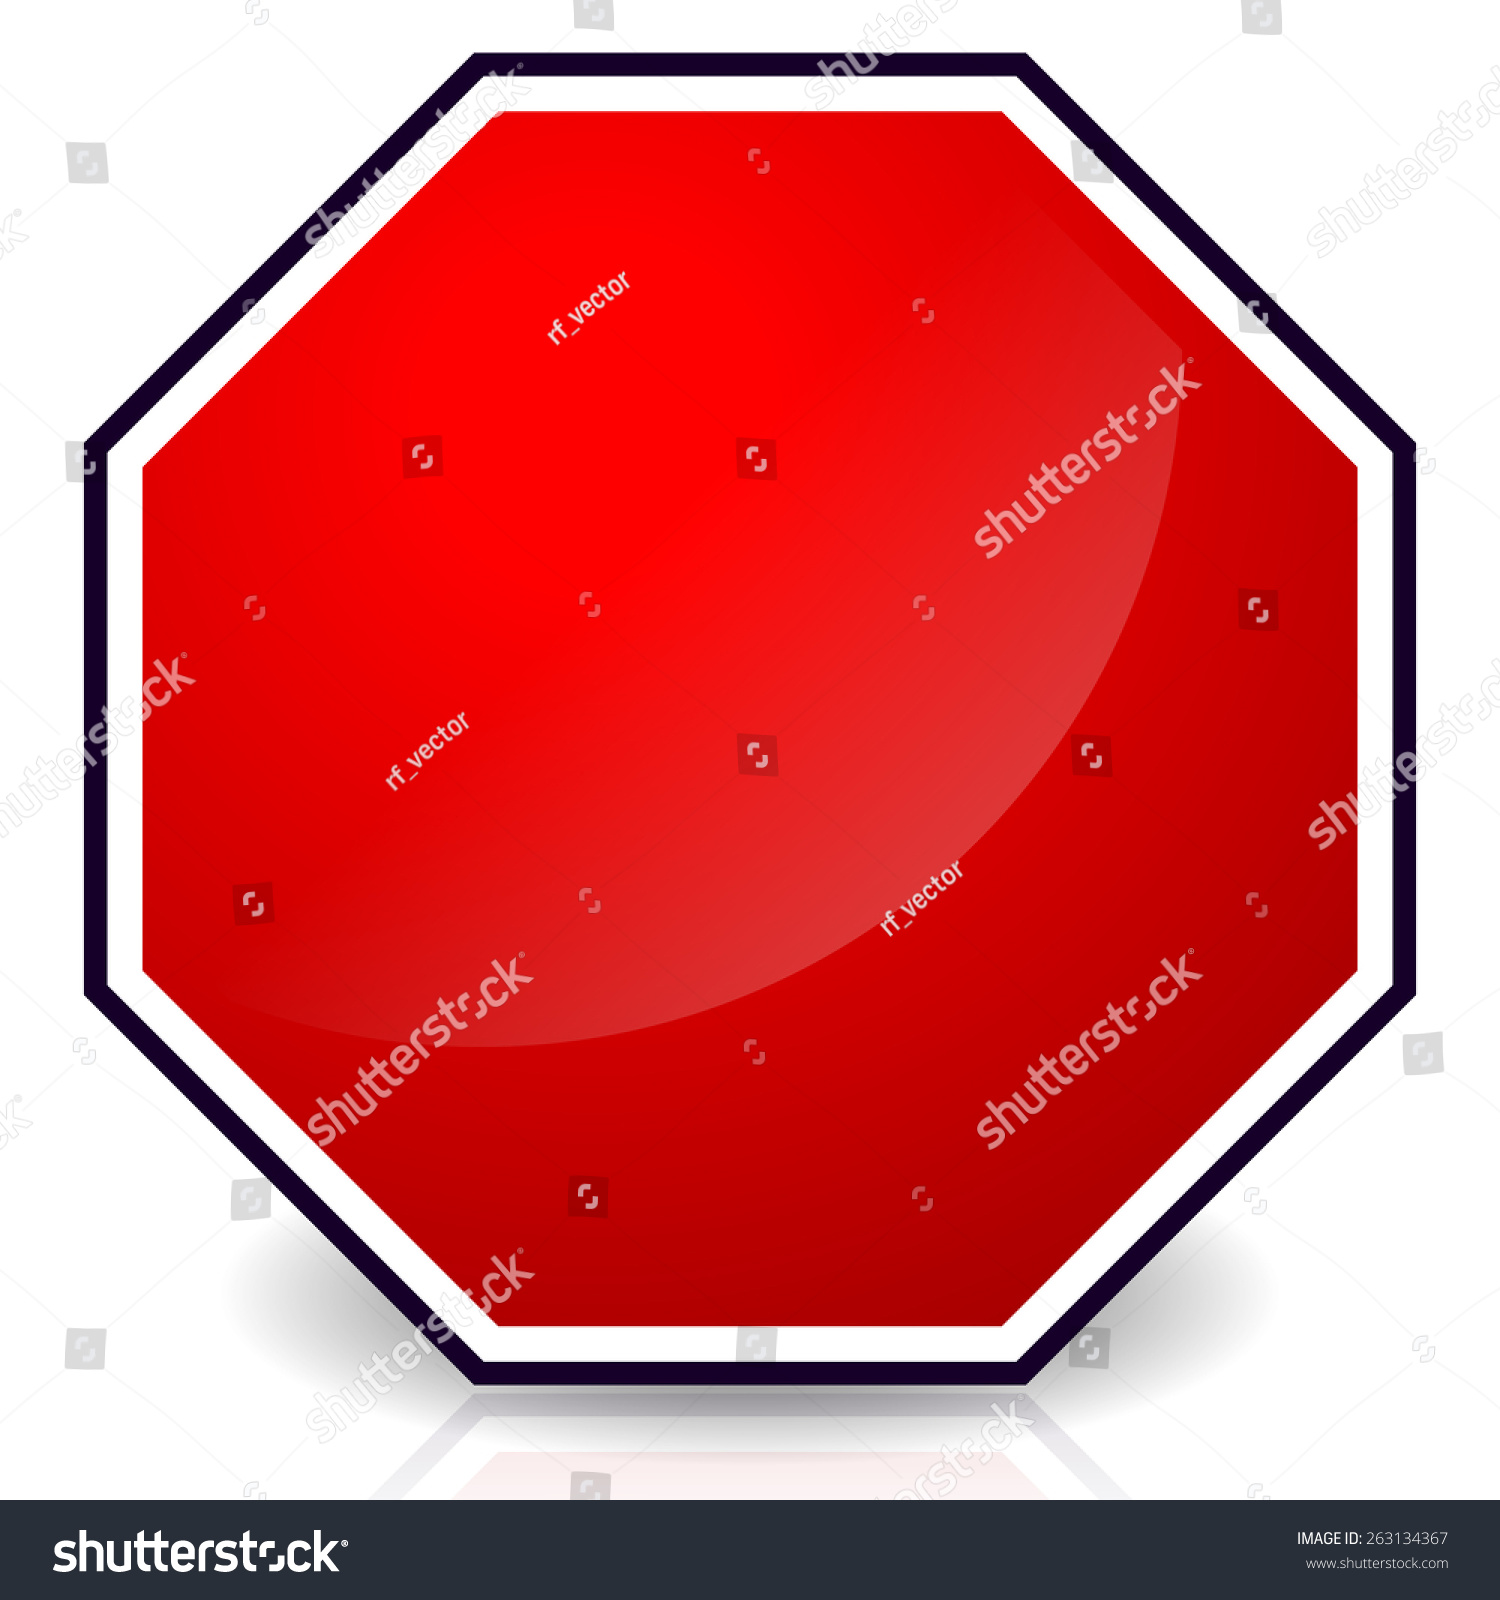 Blank Stop Sign Stock Vector (Royalty Free) 263134367 | Shutterstock